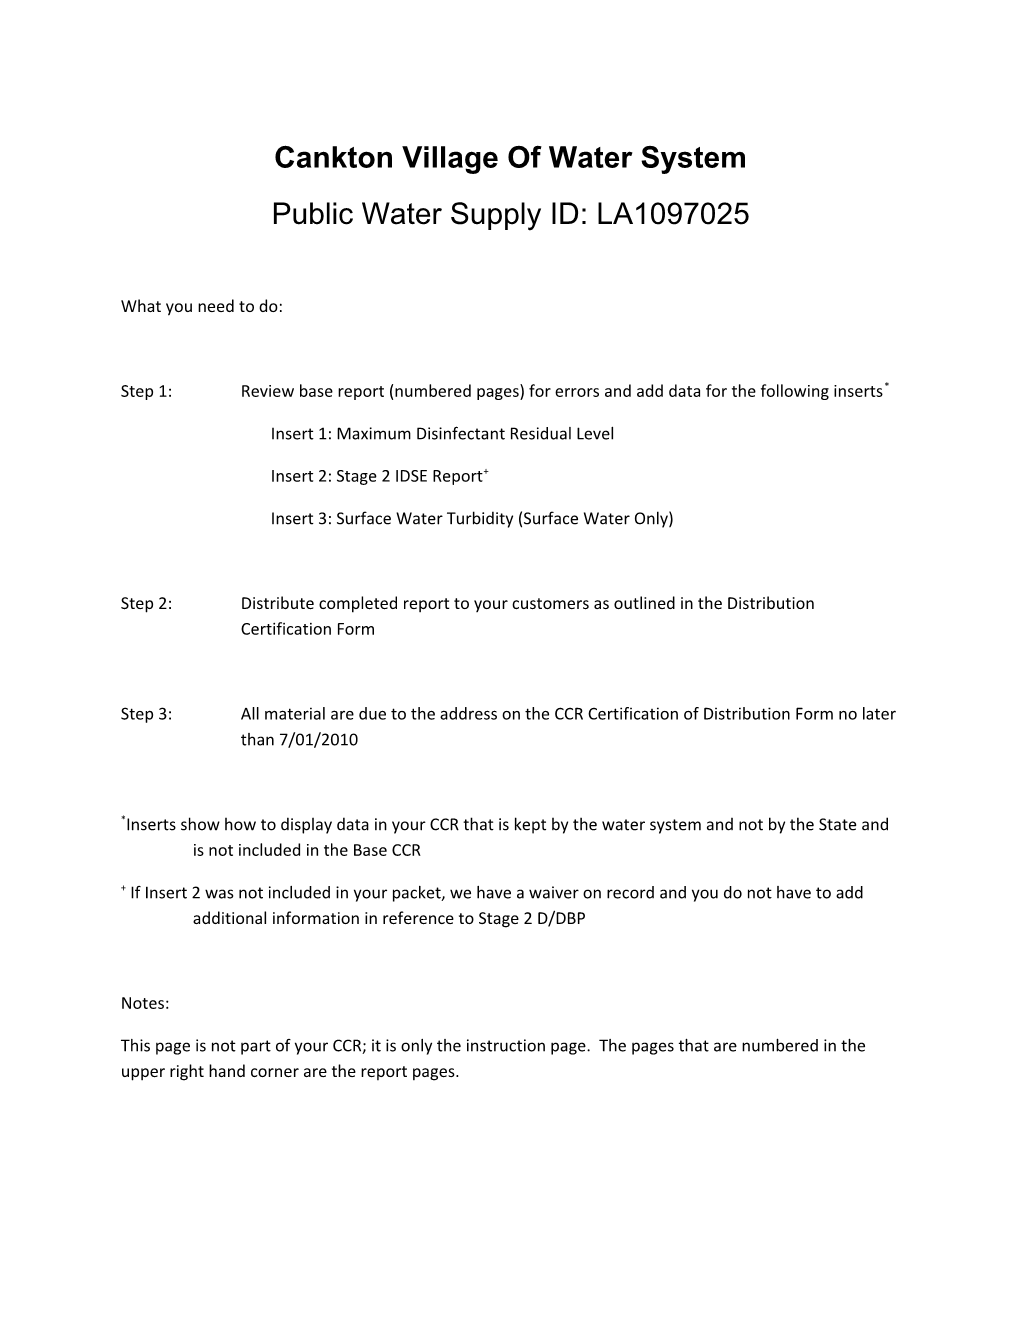 Cankton Village of Water System